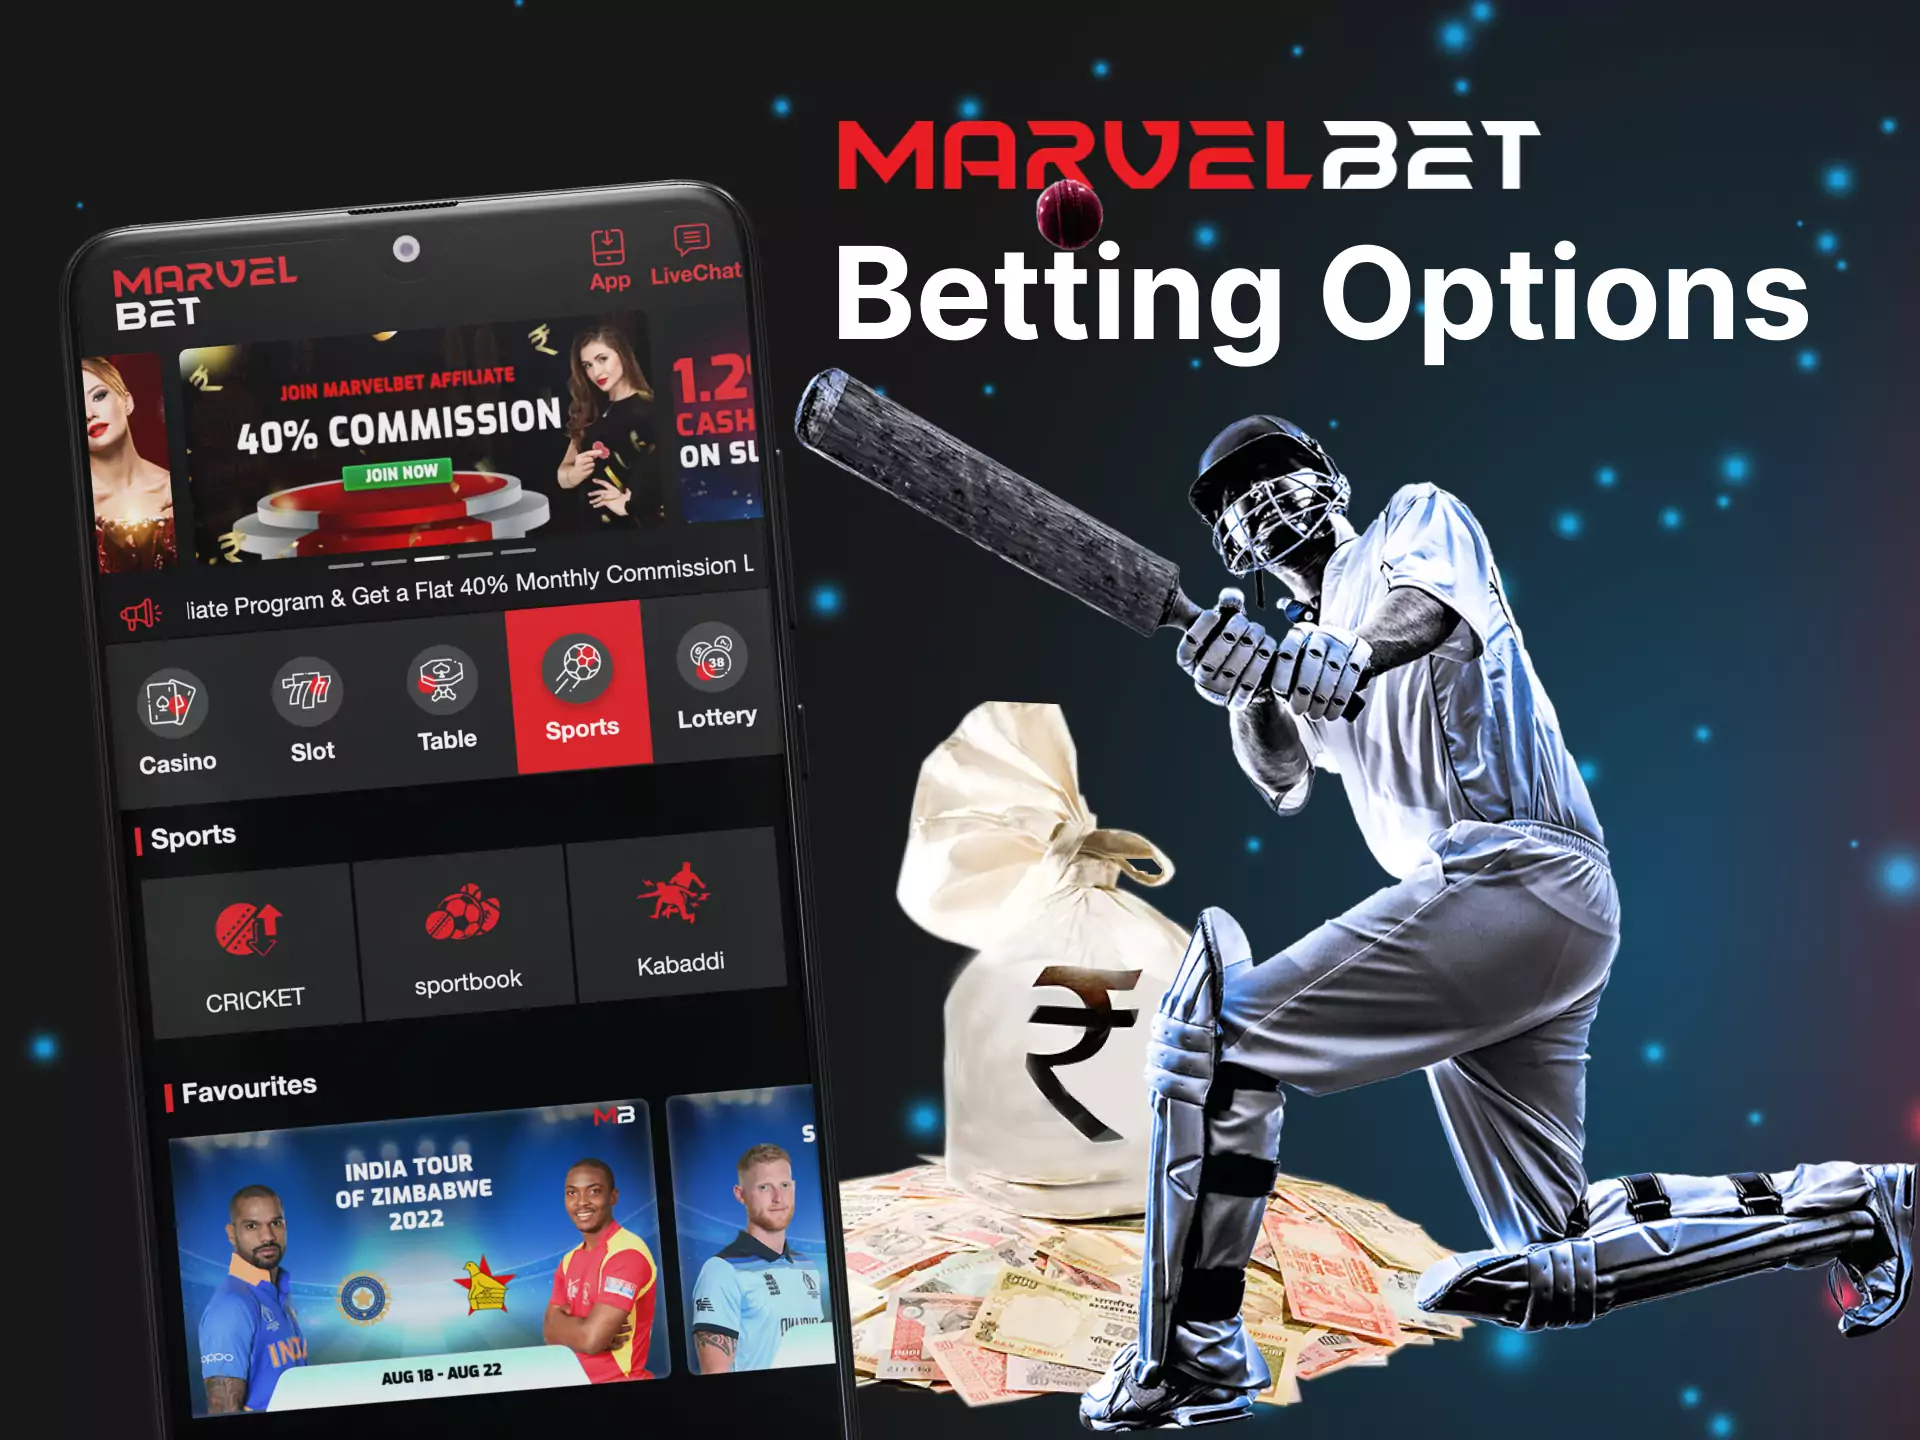 You can place bets in the Marvelbet app.